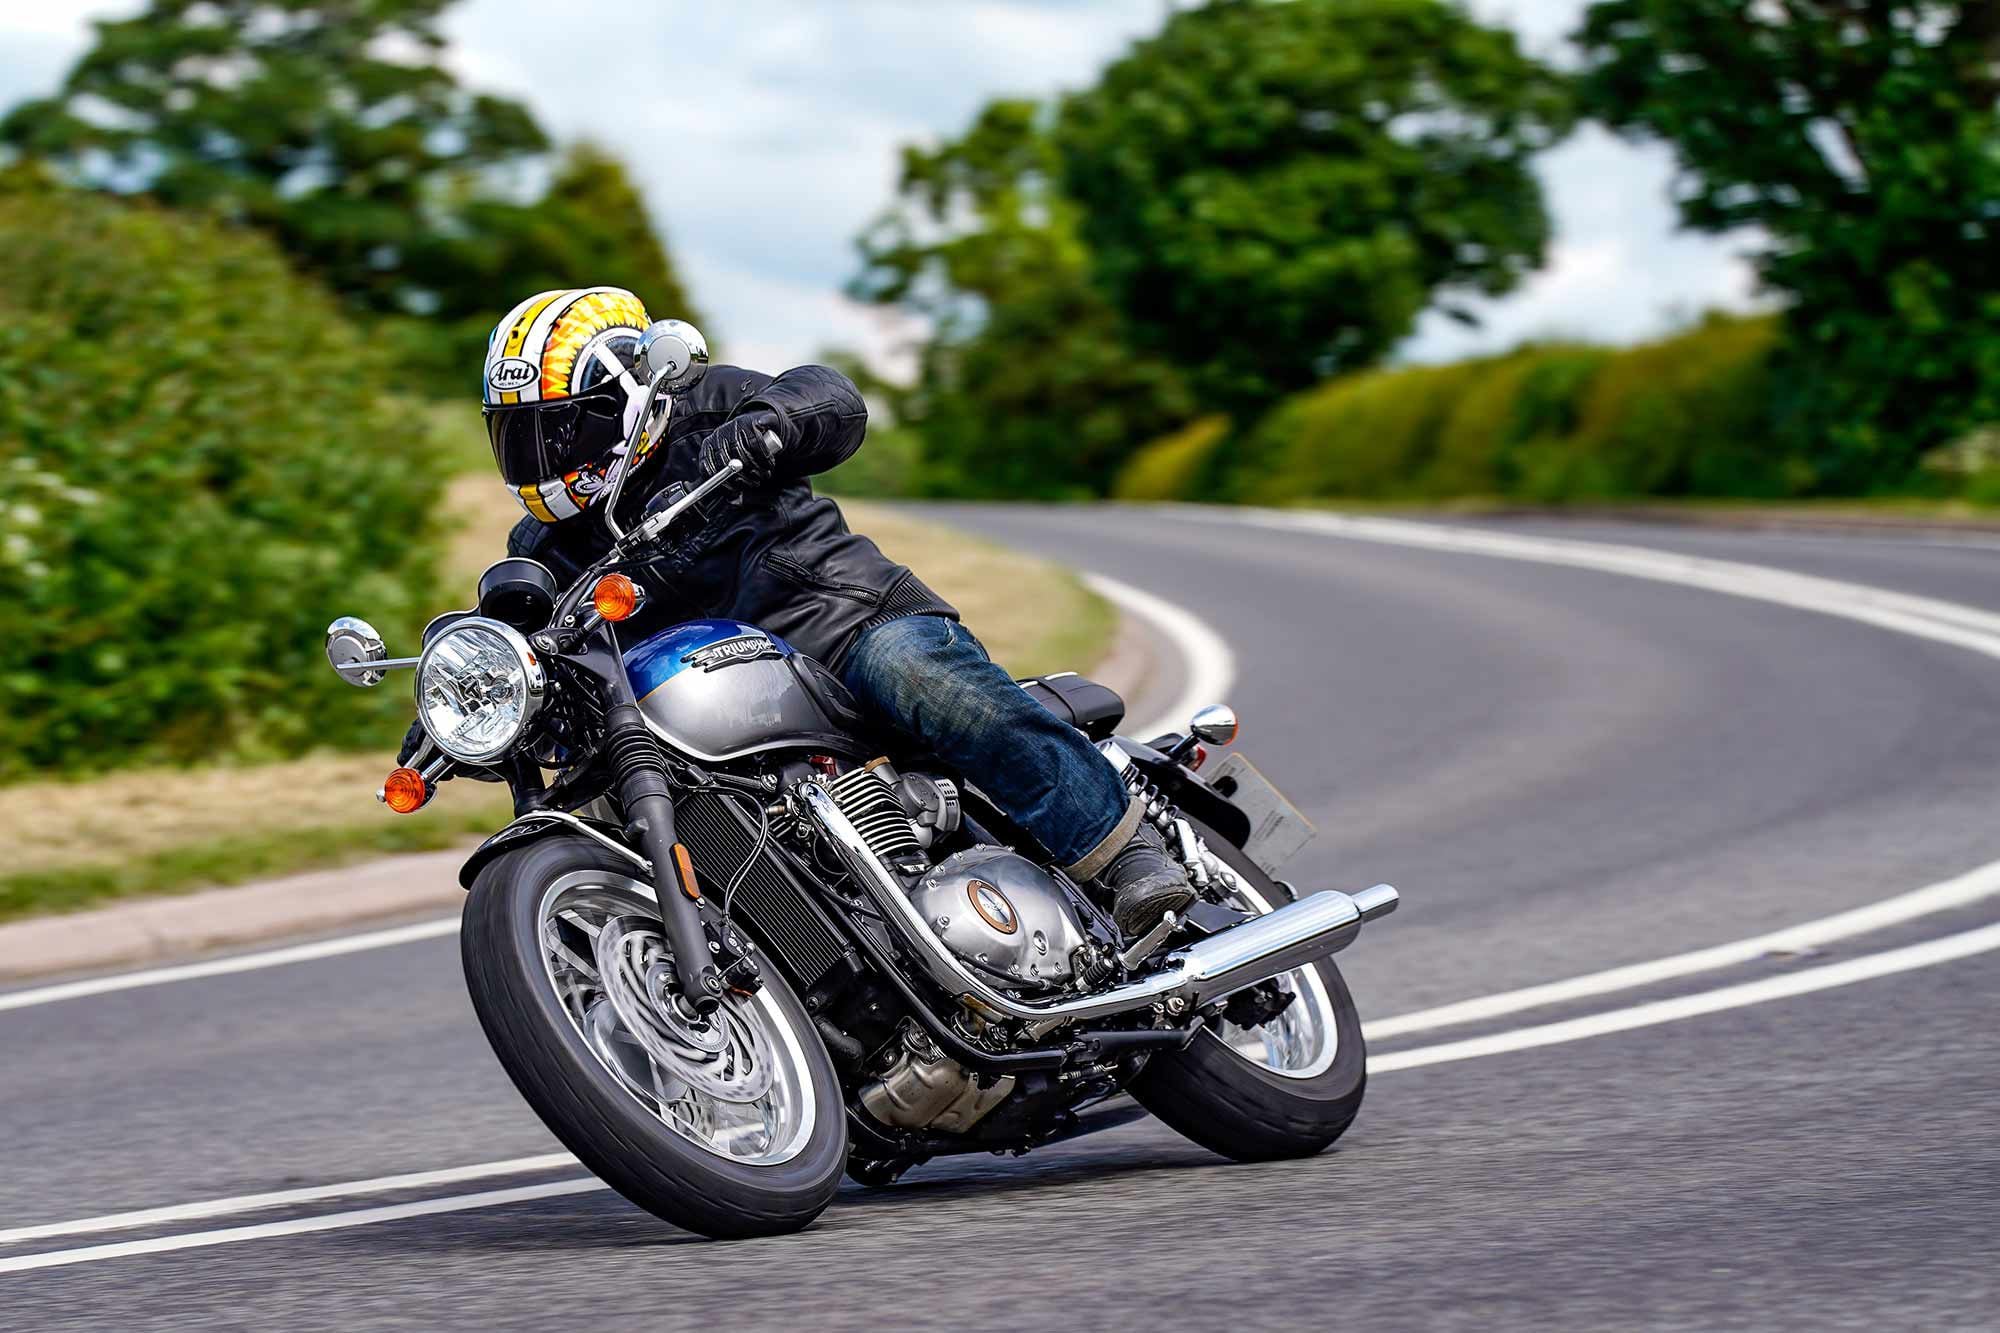 Arguably the closest competitor to Triumph’s new T120 Bonneville is its own T100. The T100 is a 900cc parallel-twin as opposed to the 1,200cc unit housed in the T120.